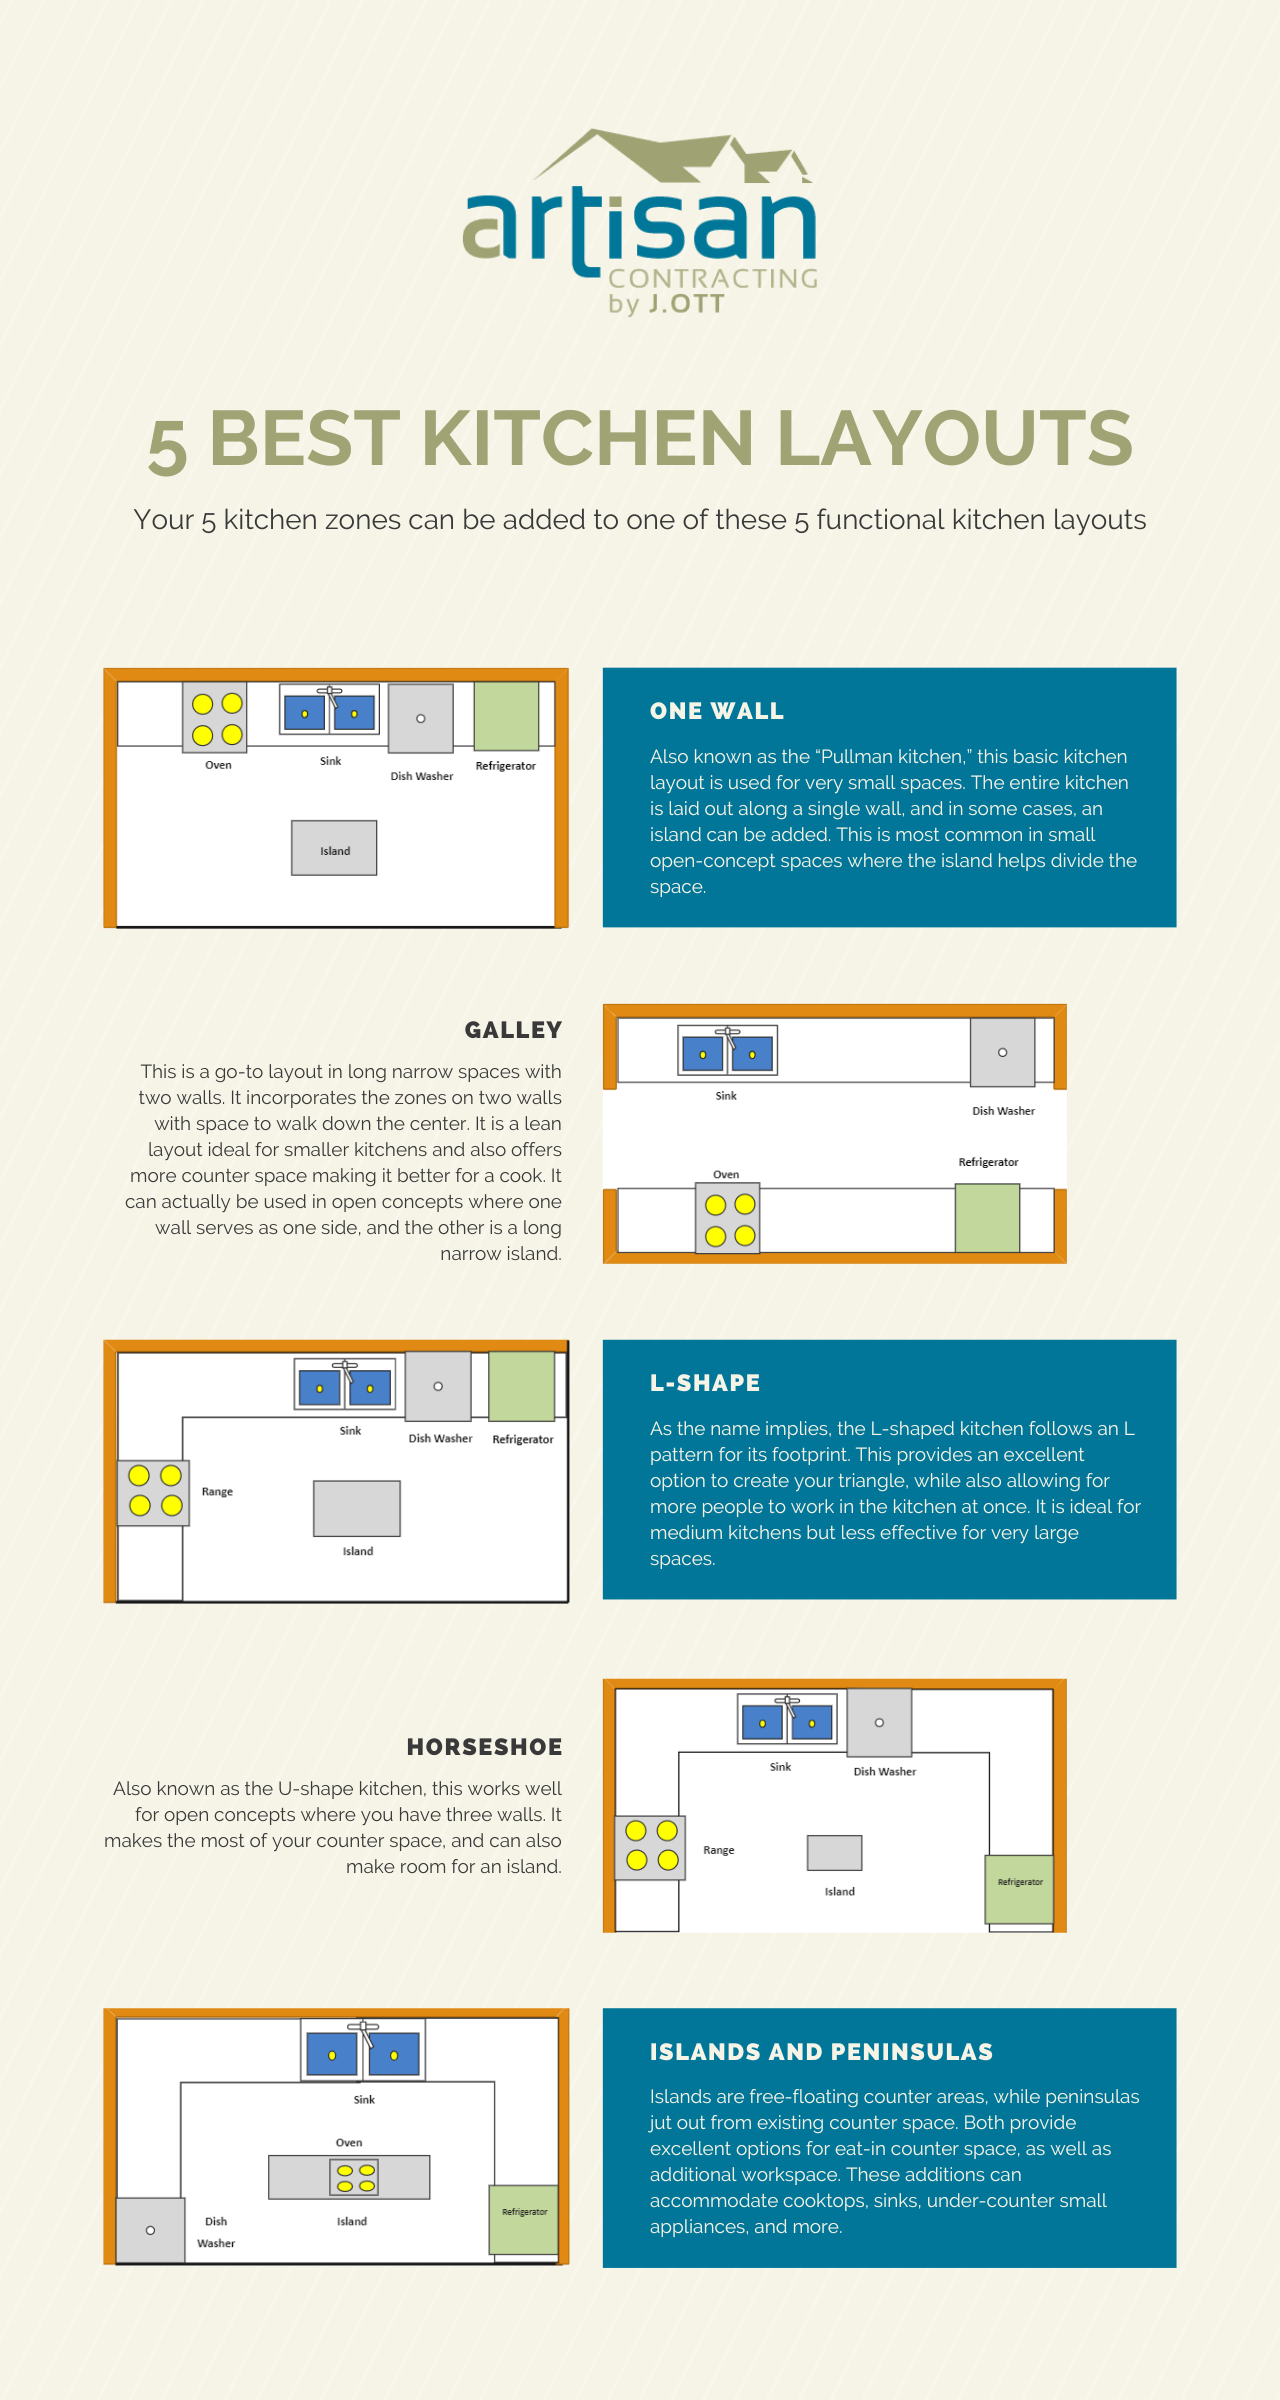 5 Kitchen Layouts Infographic - What is Kitchen Flow? The 5 Best Kitchen Layouts For Efficient Cooking & Cleaning